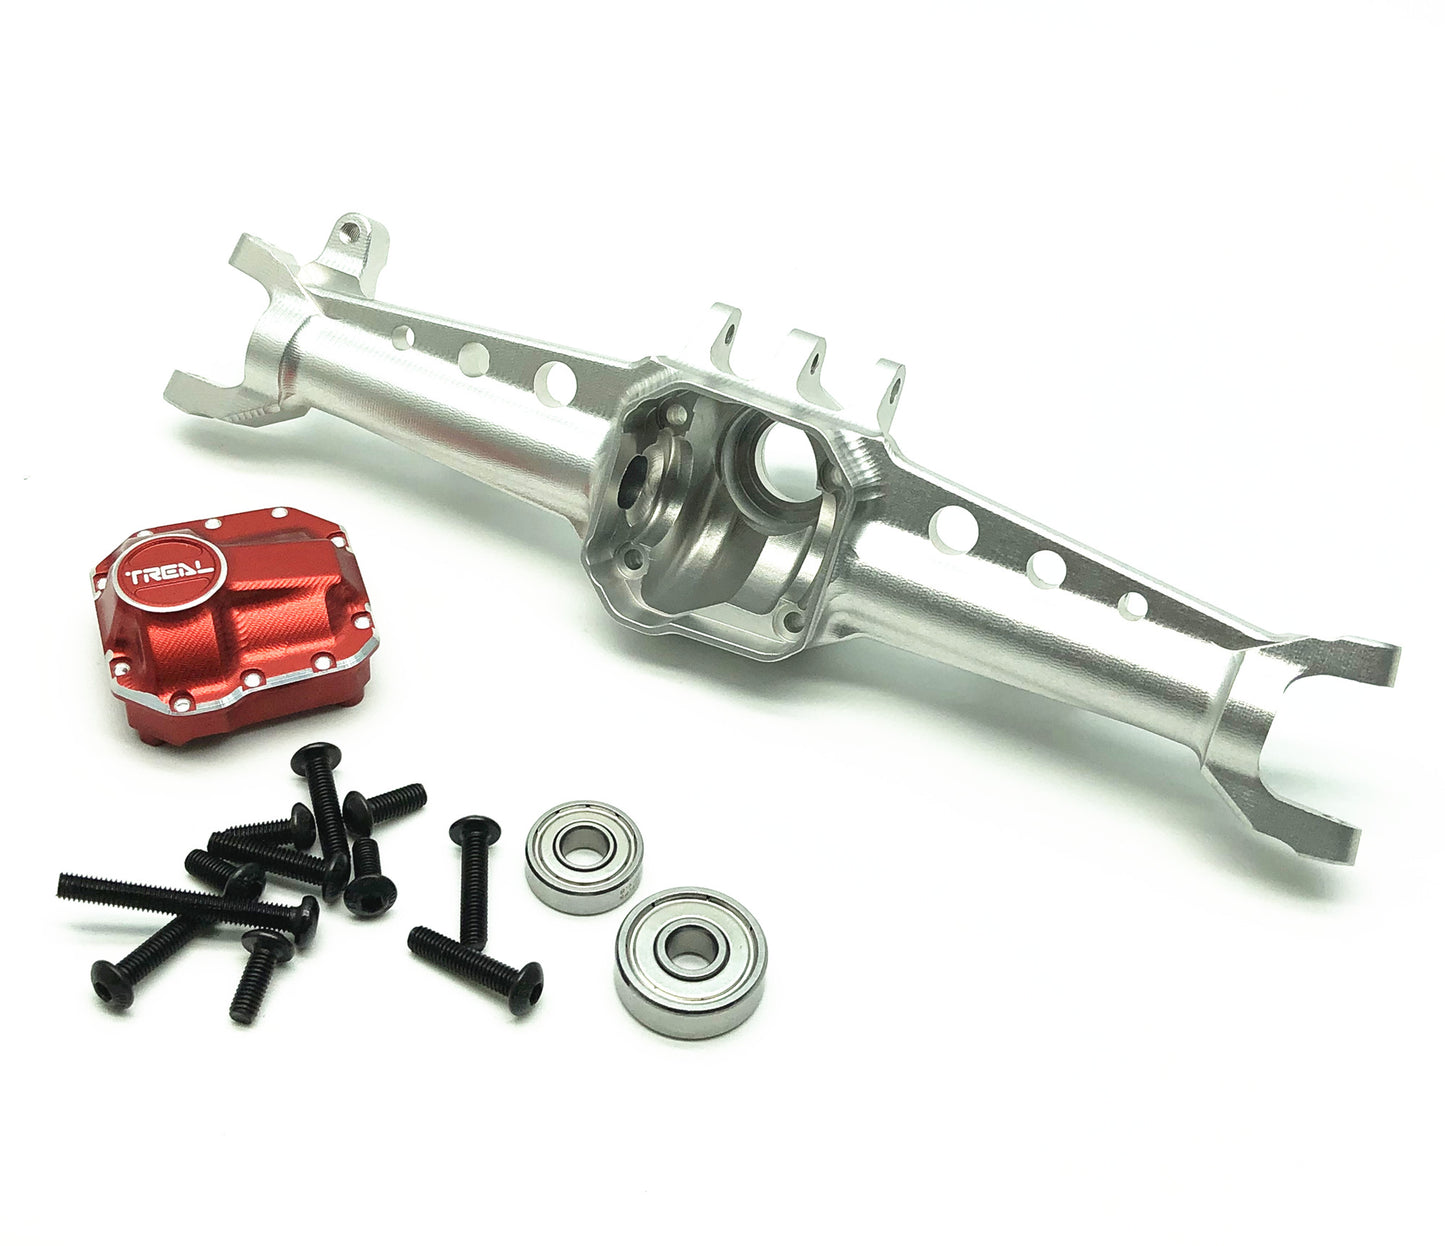 Treal SCX10 II Axles, Aluminum 7075 Metal Front Axle, One Piece CNC Billet Machined Compatible with Axial SCX10 2 AR44